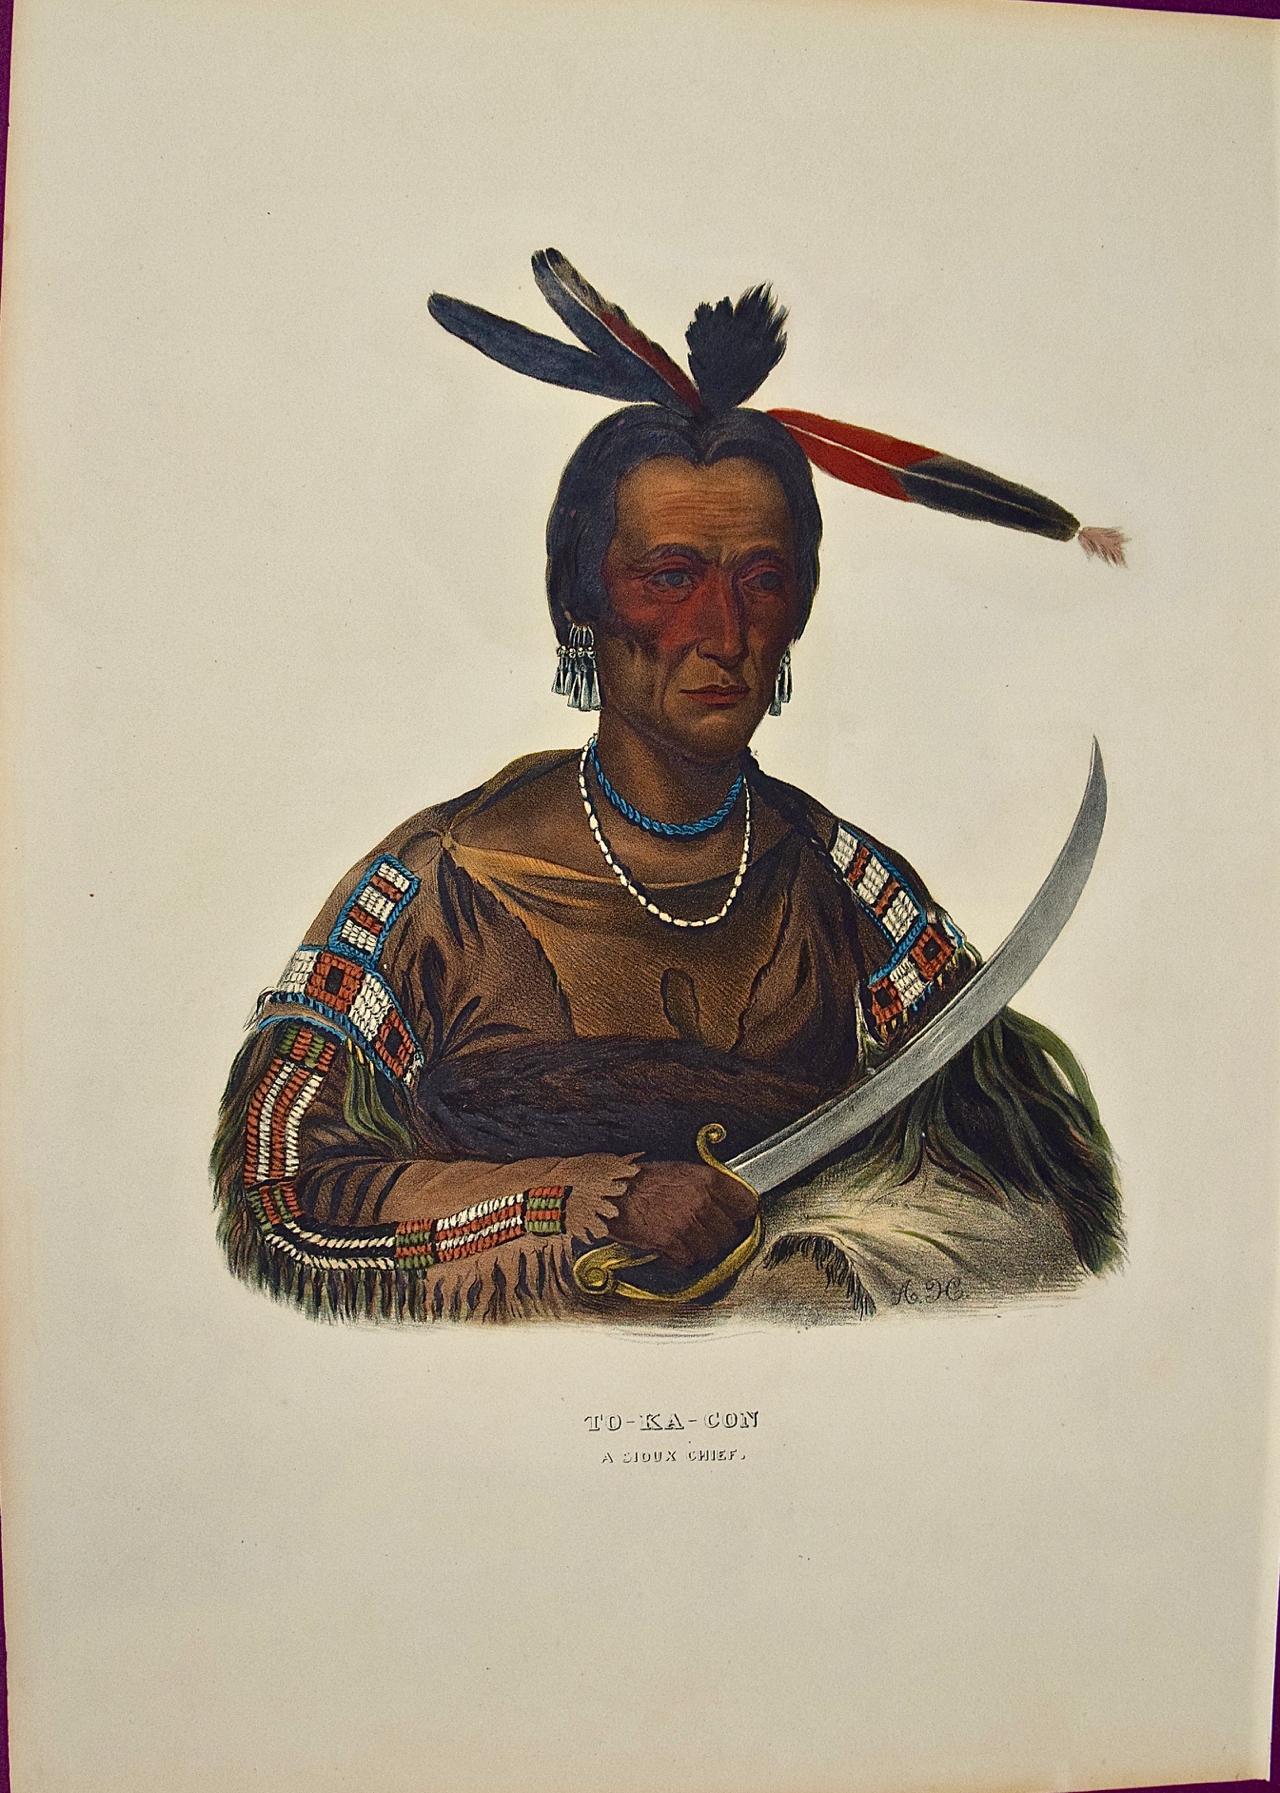 To-Ka-Con, A Sioux Chief: Hand-colored McKenney & Hall Folio-sized Lithograph